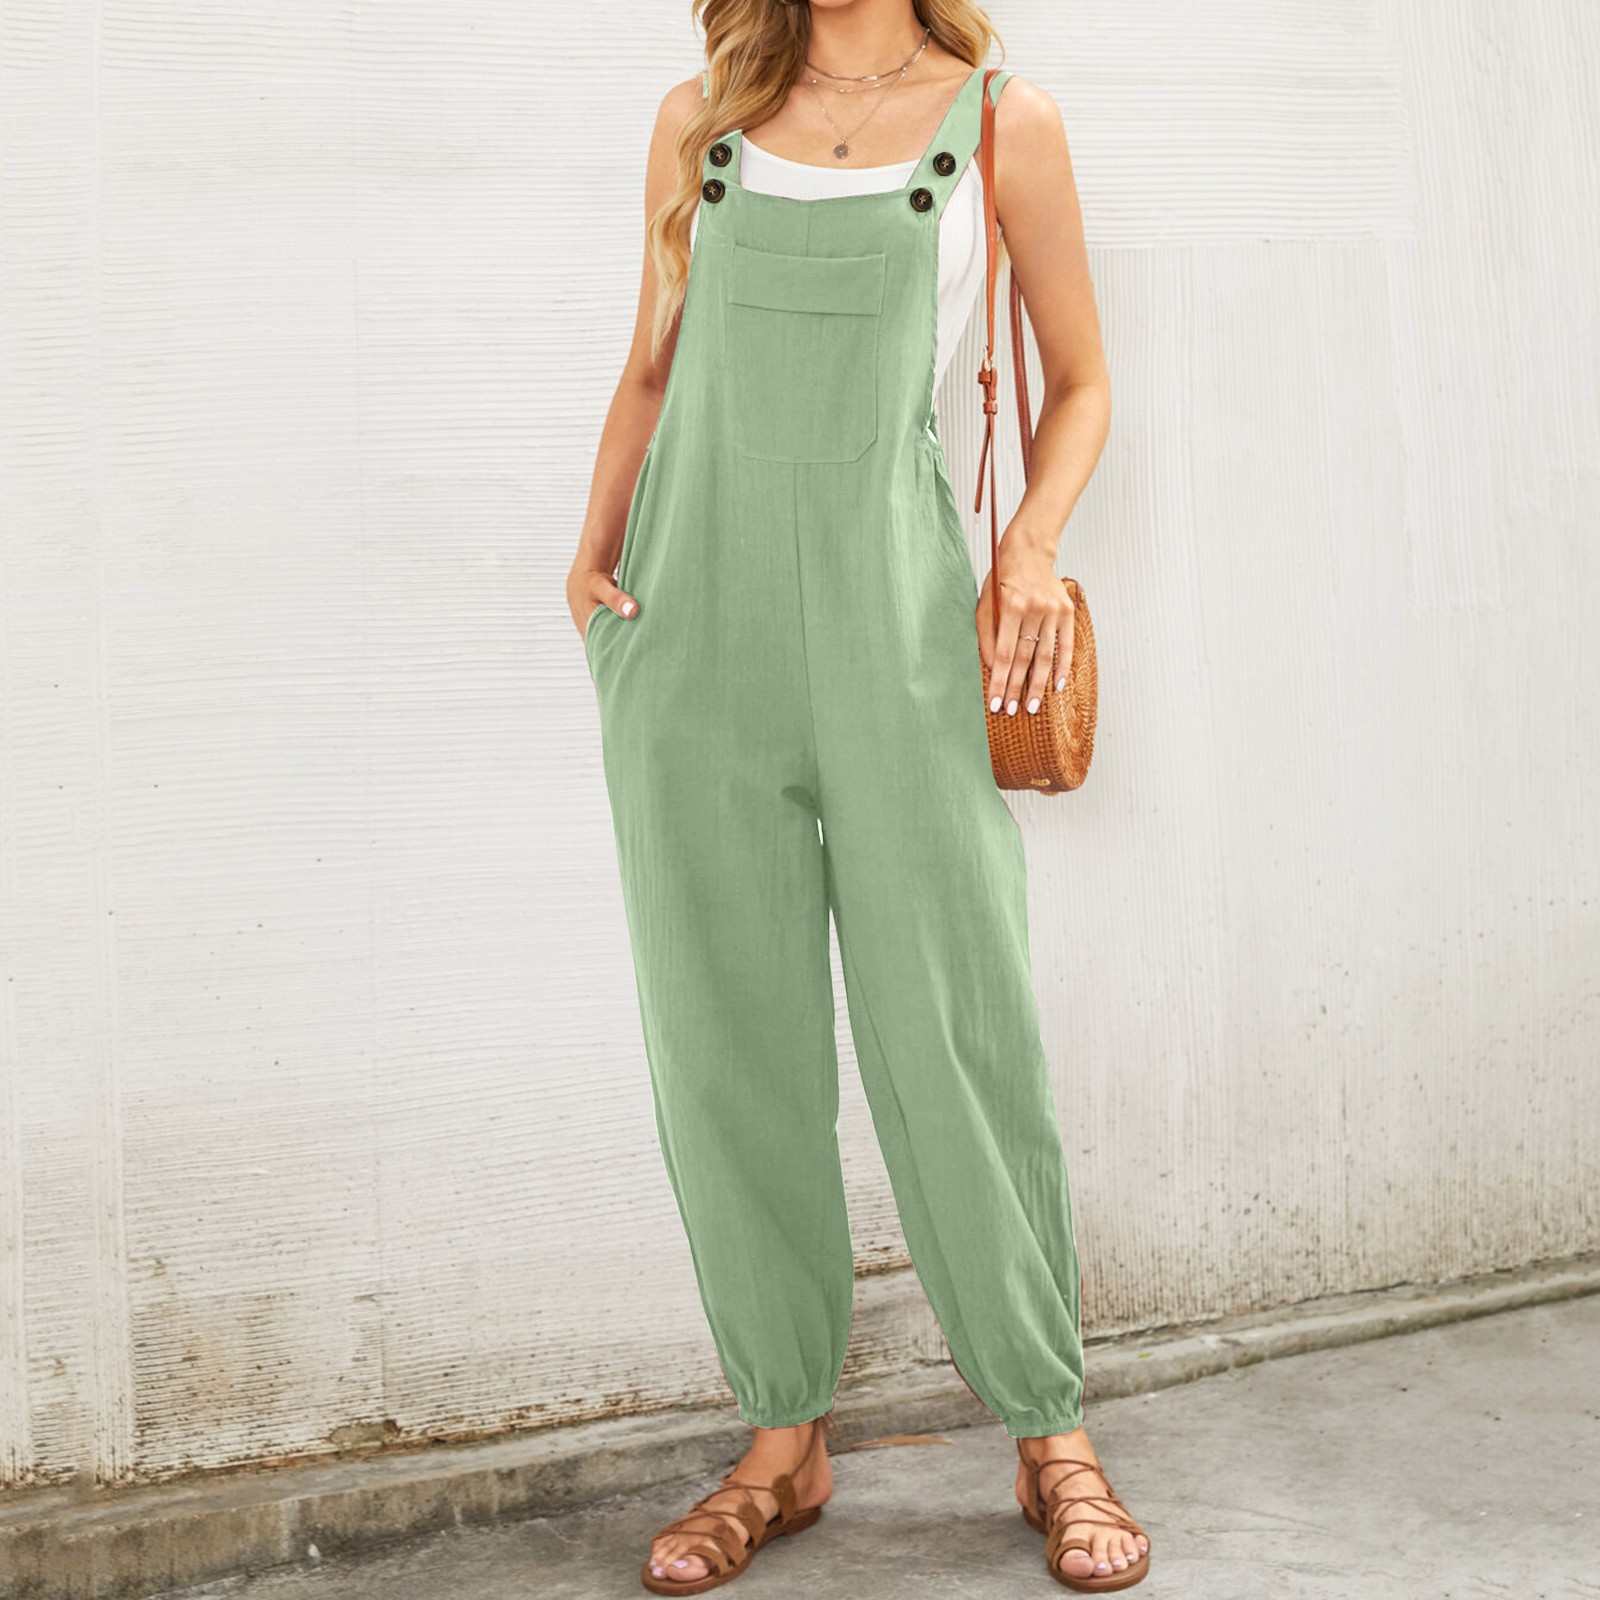 Women's Sleeveless Overalls Jumpsuit Casual Solid Summer Wide Leg Bib Pants  Bottons Jumpsuit Romper With Button Pockets Overall Pajamas Junior Jumpsuits  And Rompers